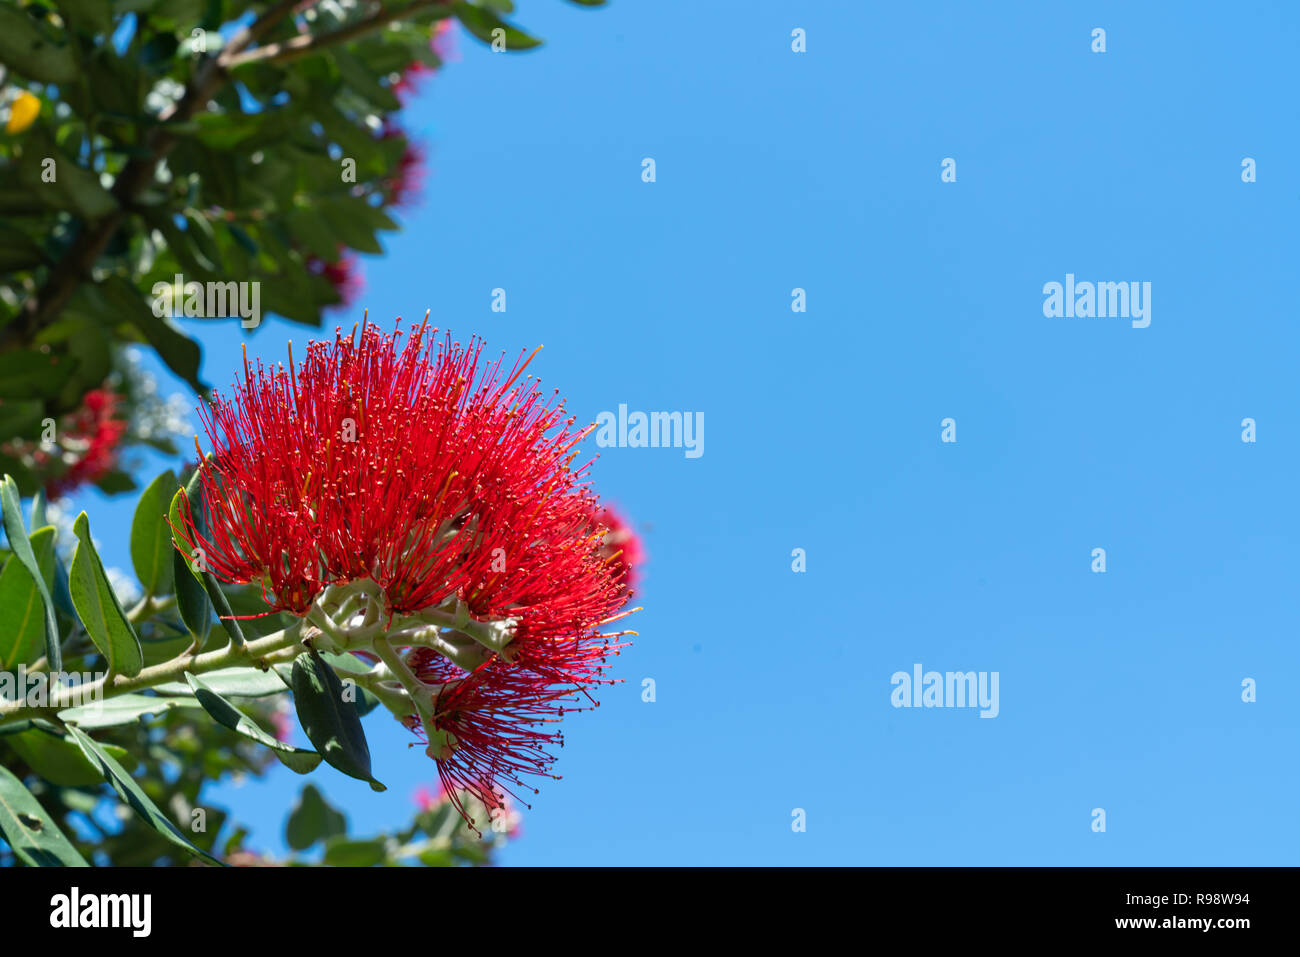 Bright red pohutukawa flower close-up against blue sky Stock Photo